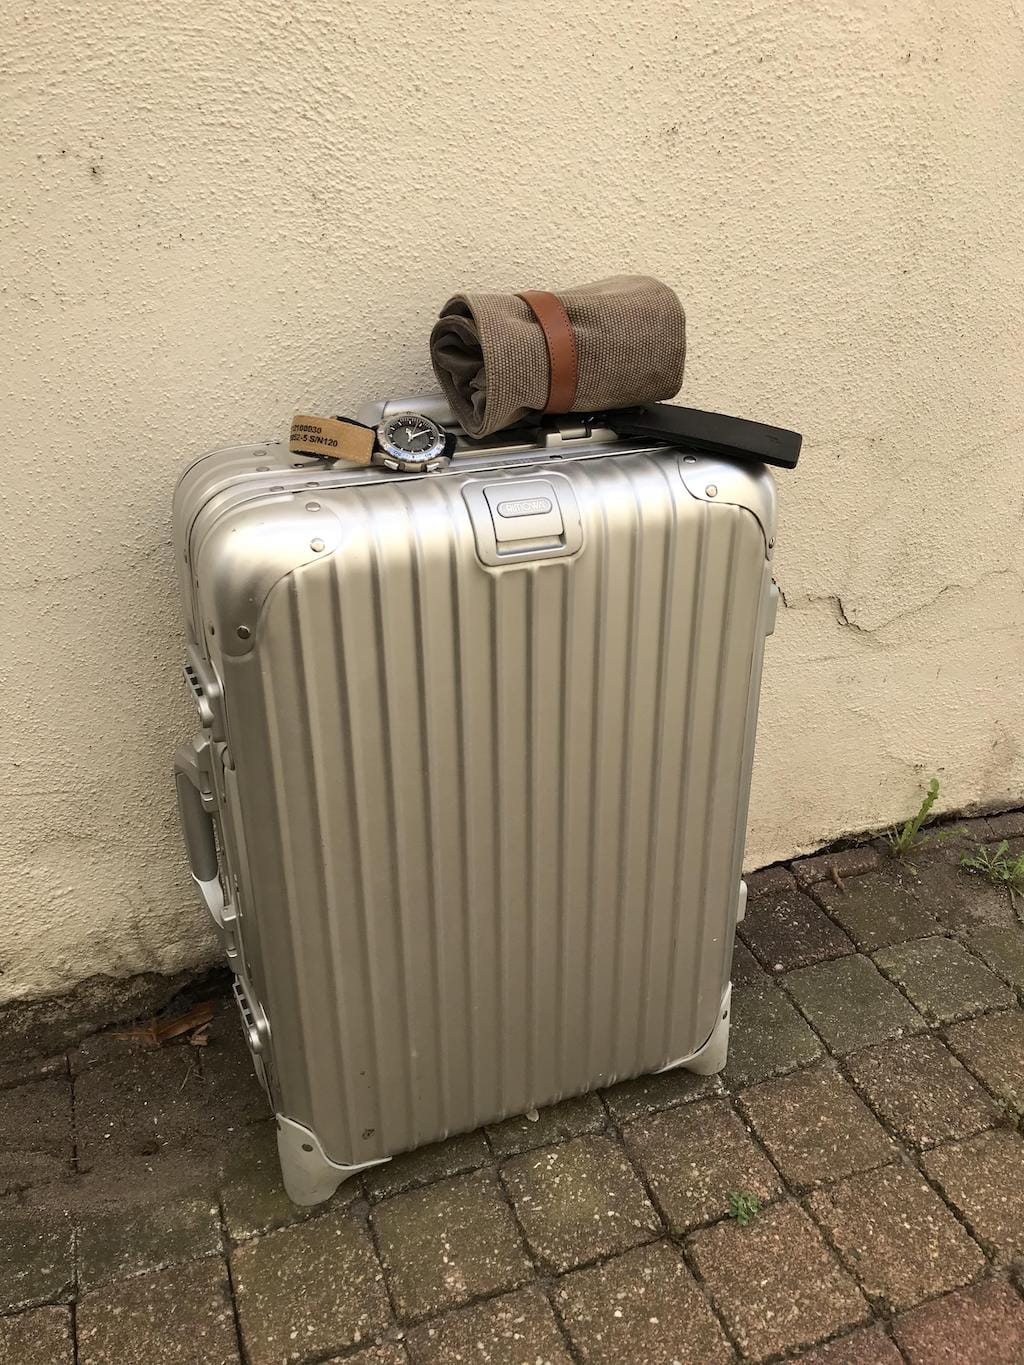 difference between rimowa classic and original